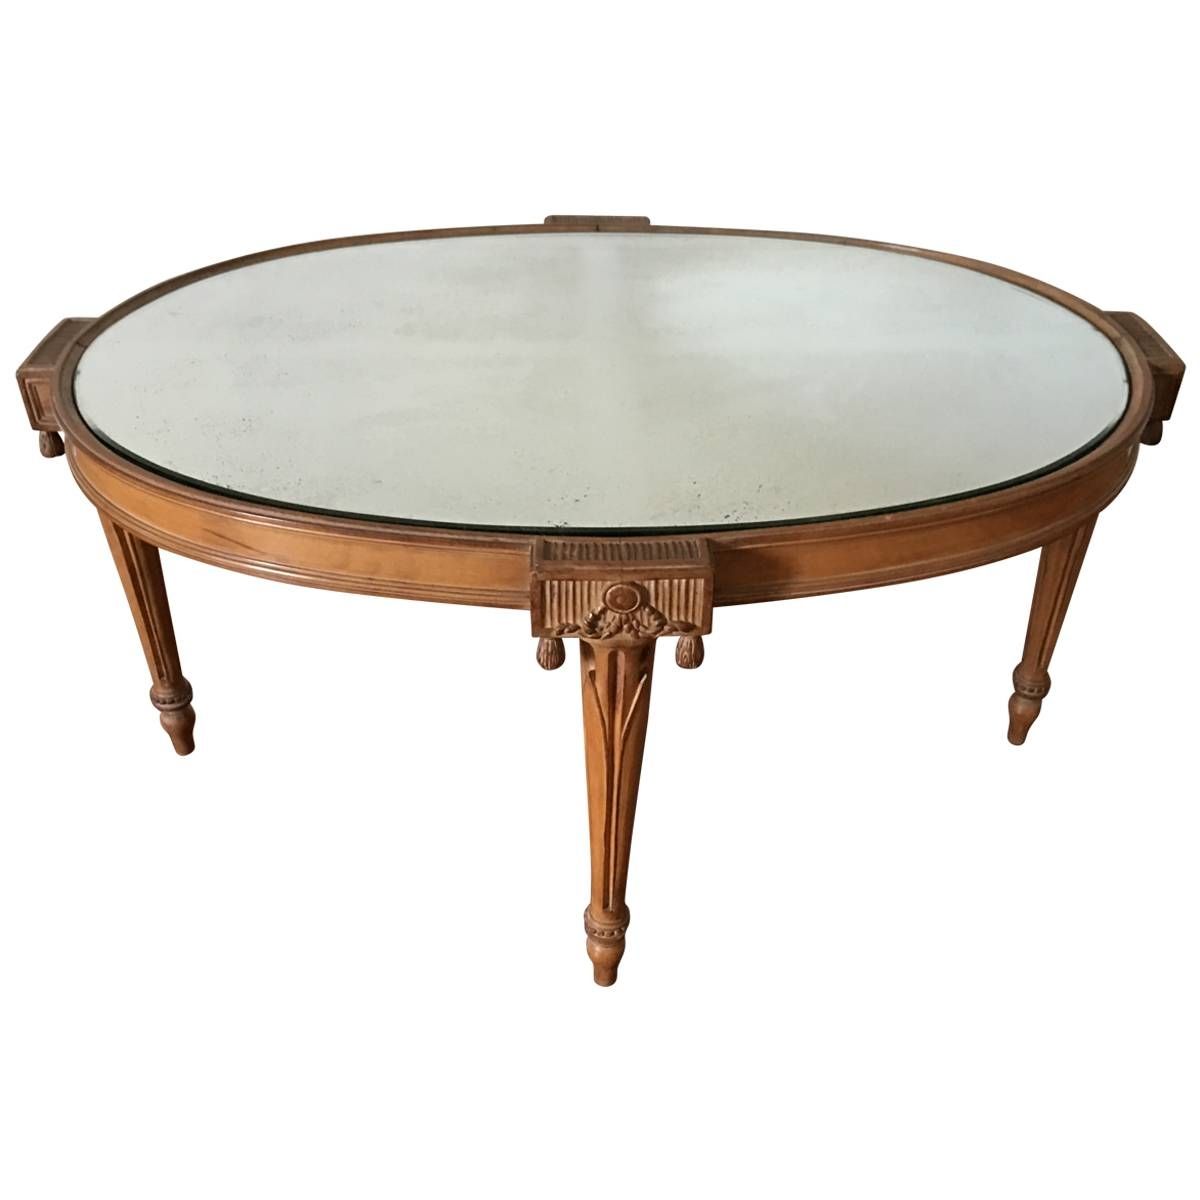 Viyet – Designer Furniture – Tables – Antique Oval Wooden Coffee For Oval Wood Coffee Tables (View 20 of 30)